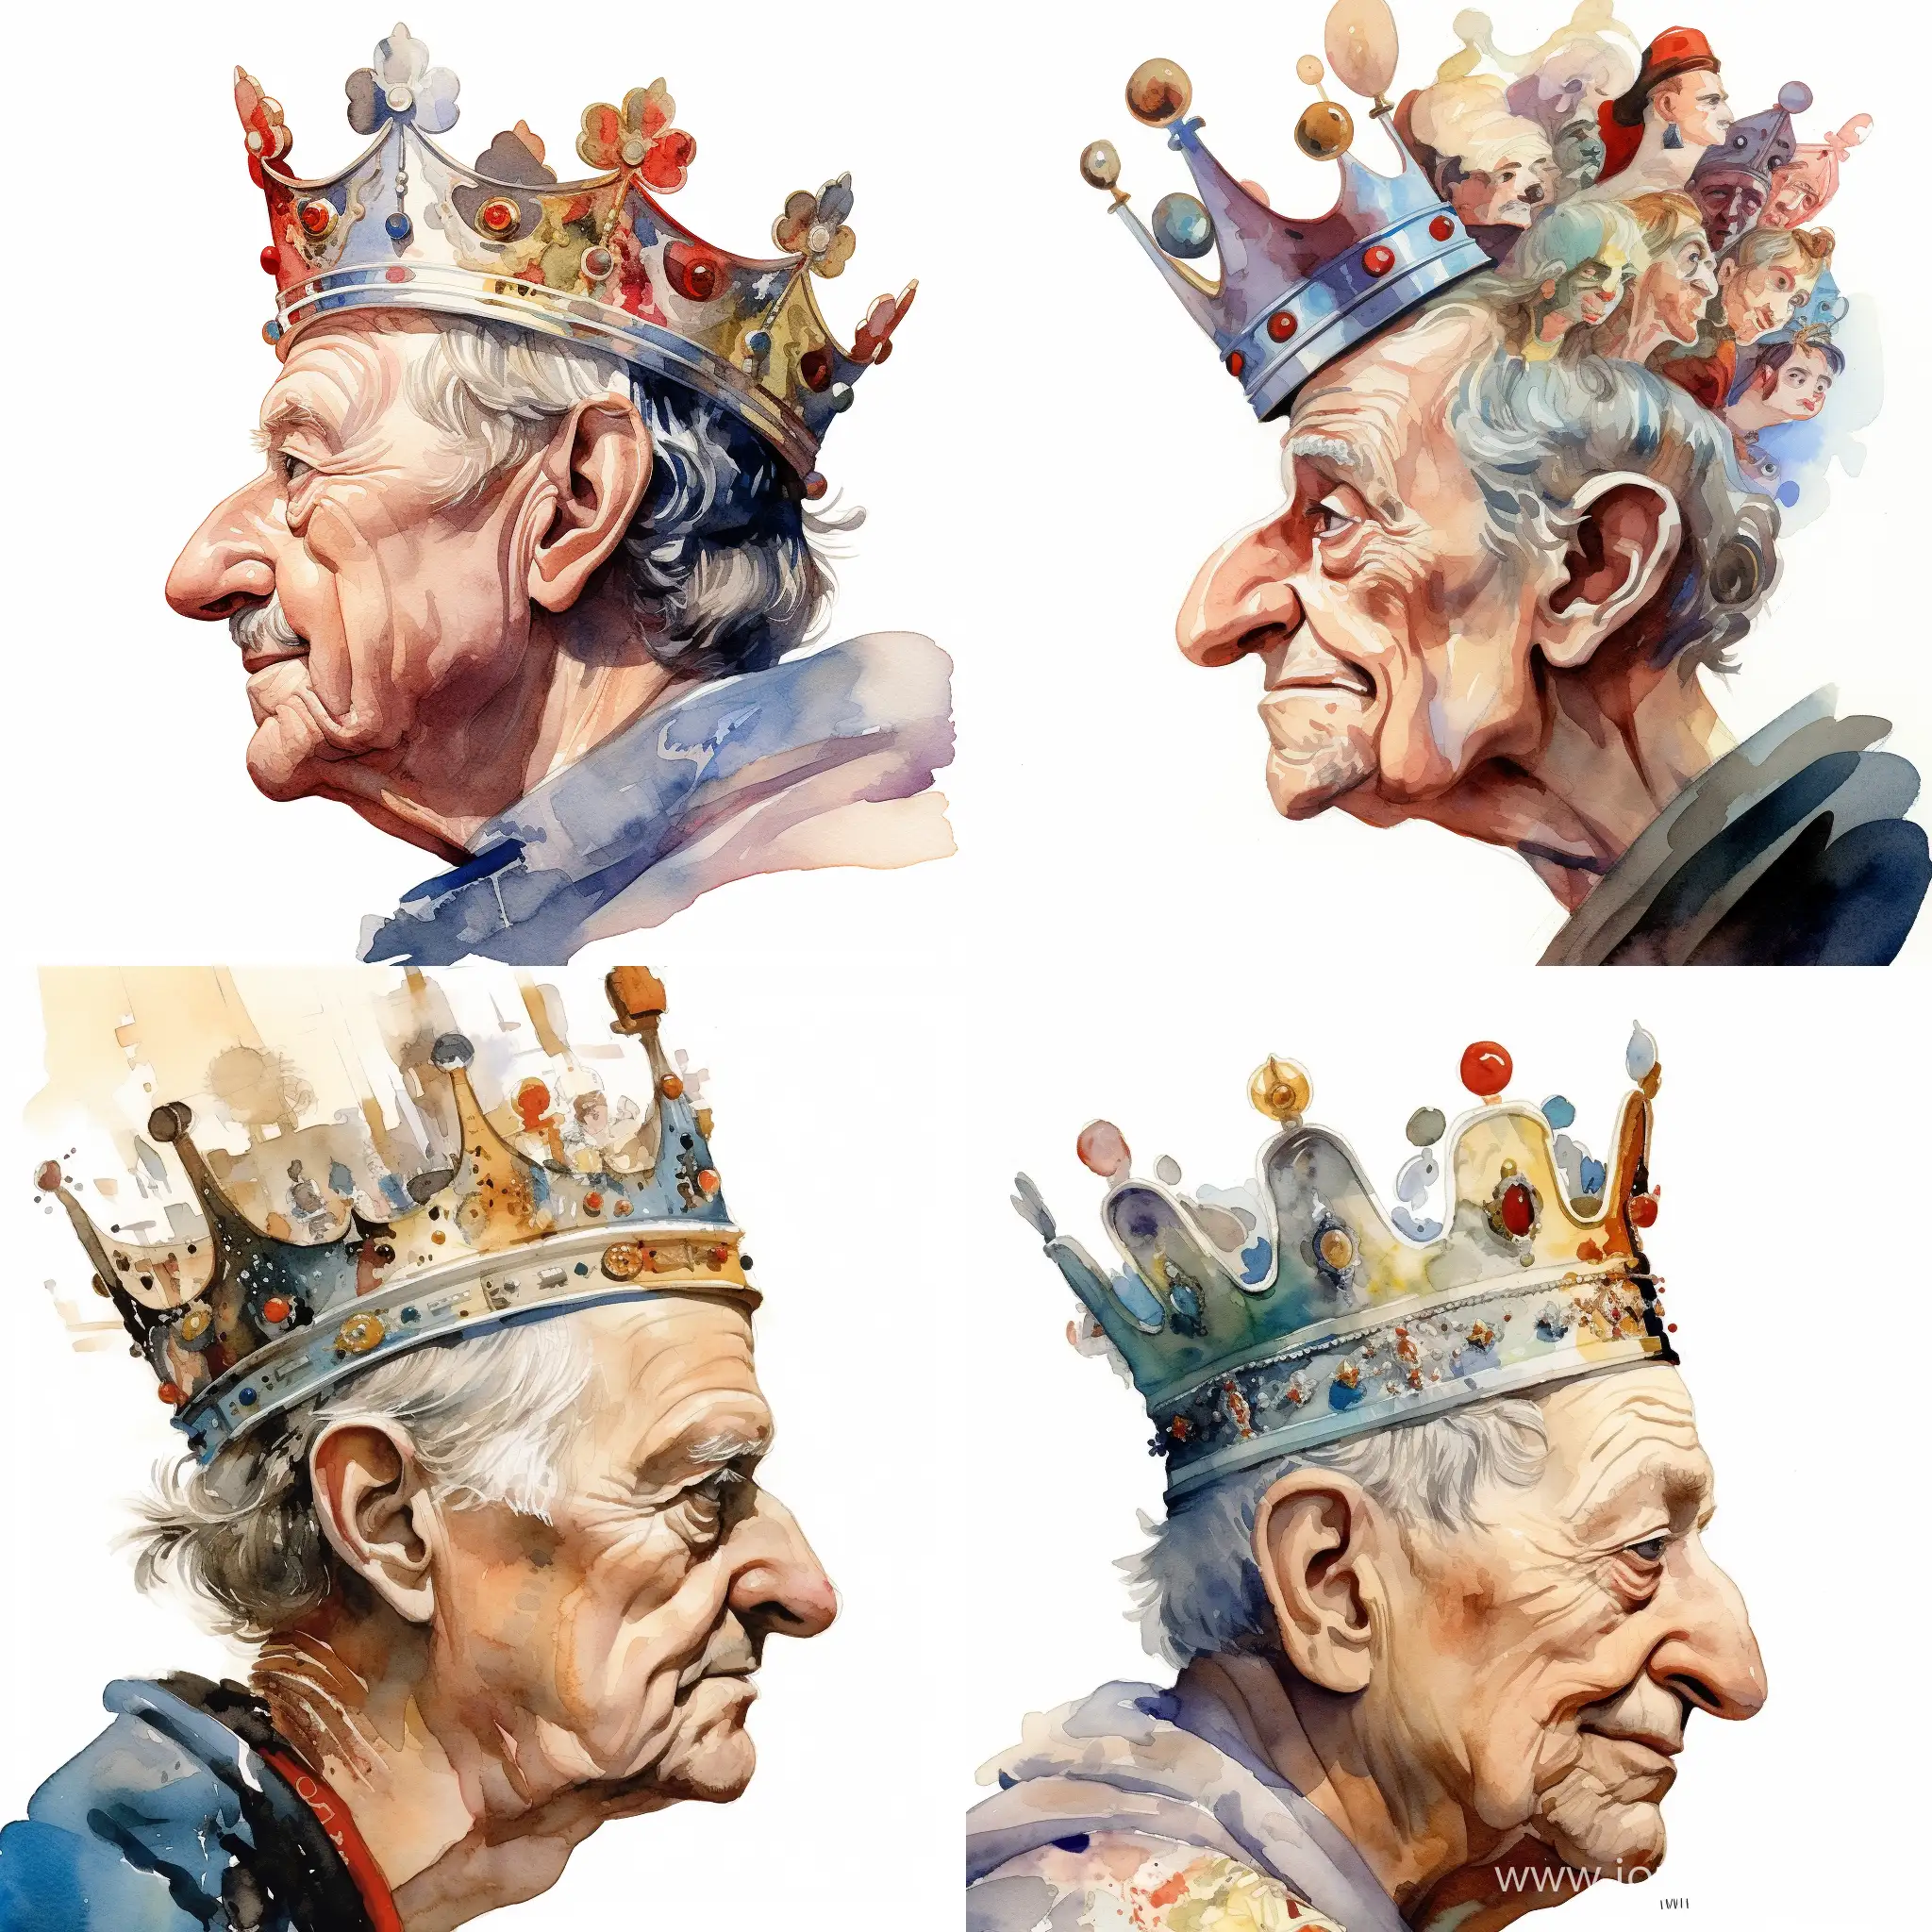 Pierre Richard, elderly, in profile, with a crown on his head, against the background of characters from films, in detail, on a white background, caricature, watercolor, in detail, impressionist style